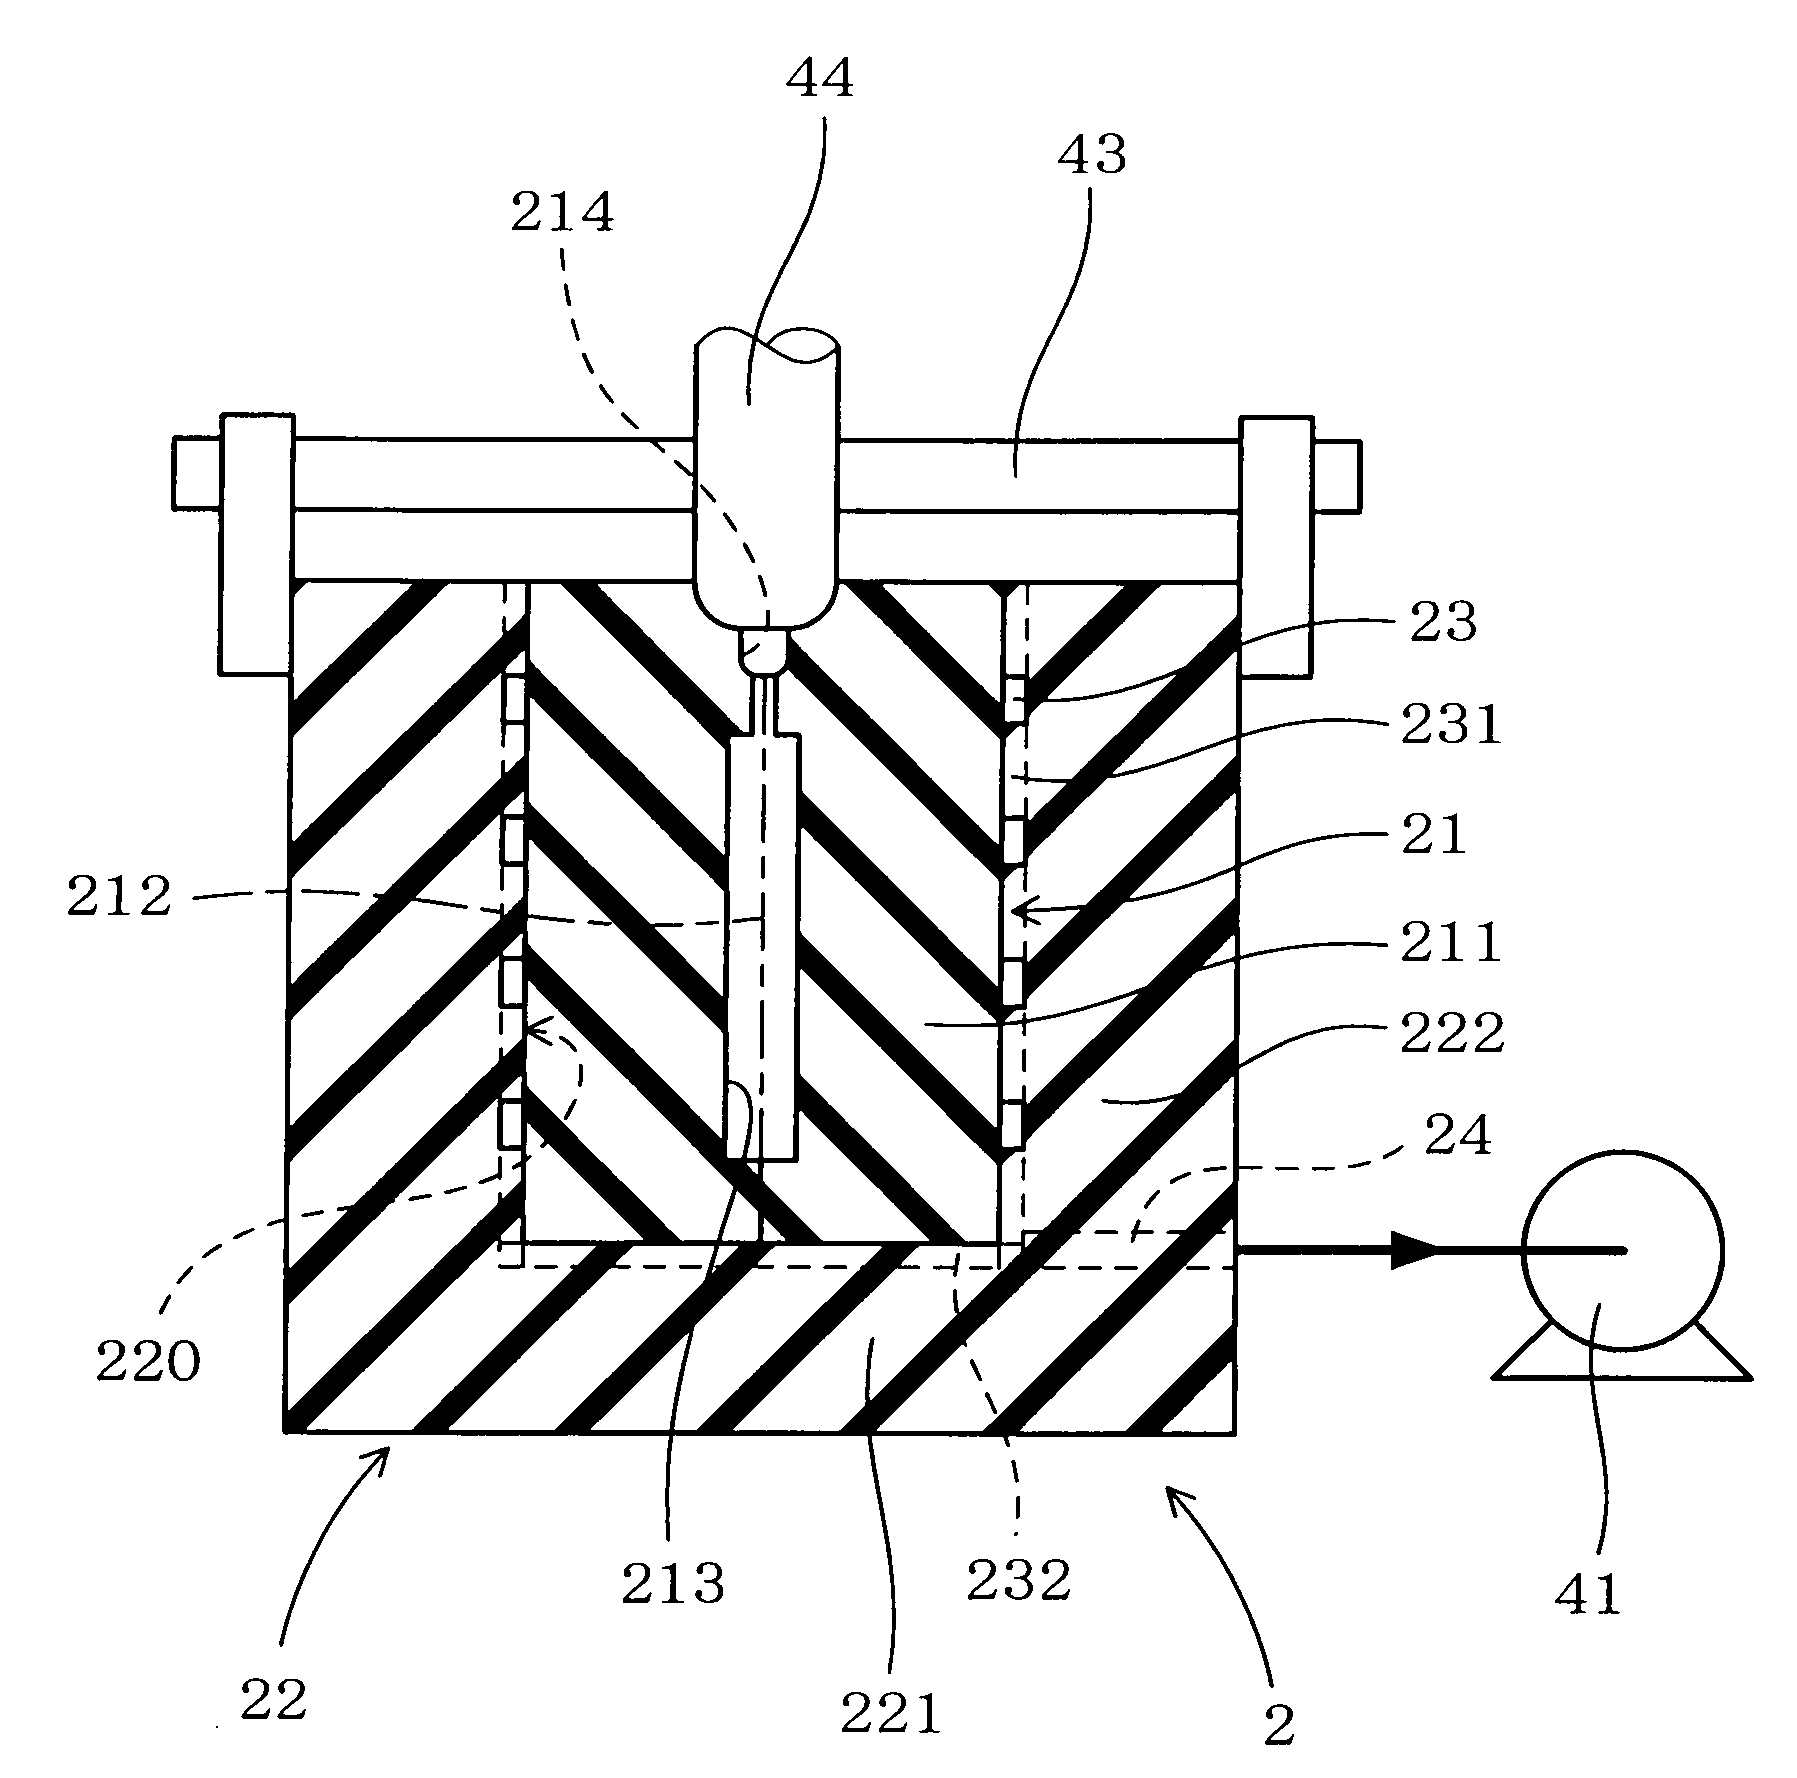 Mold for molding resin, apparatus for molding resin, and method for molding resin